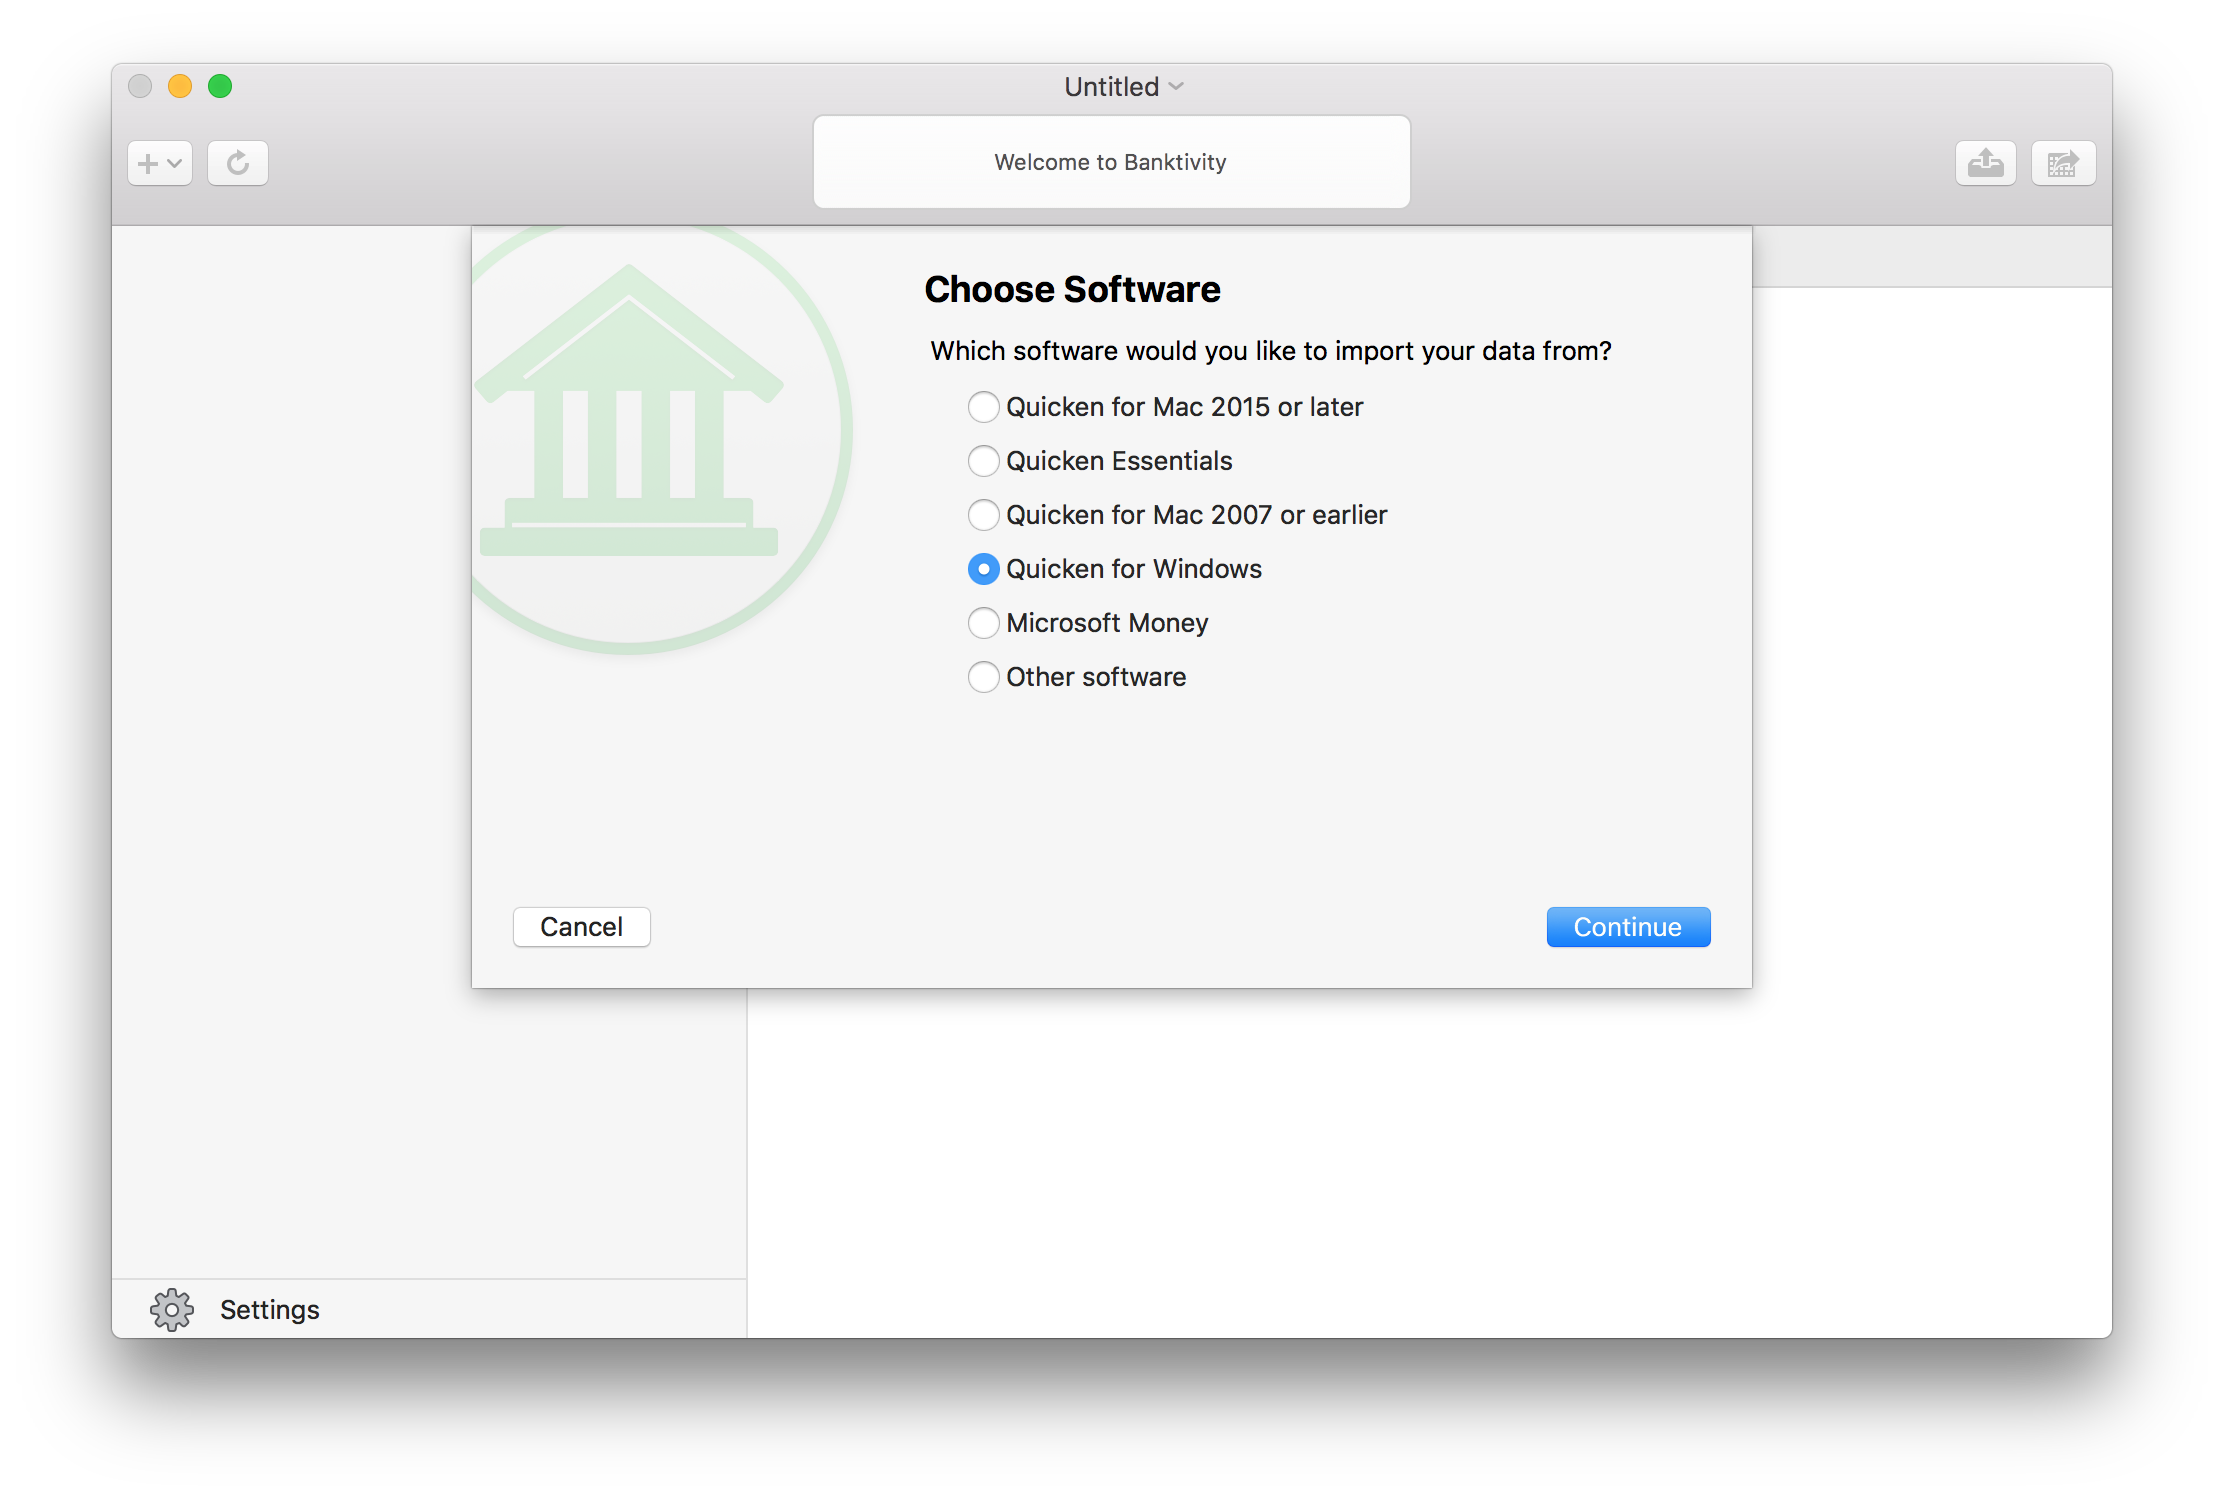 license agreement for quicken for mac 2015